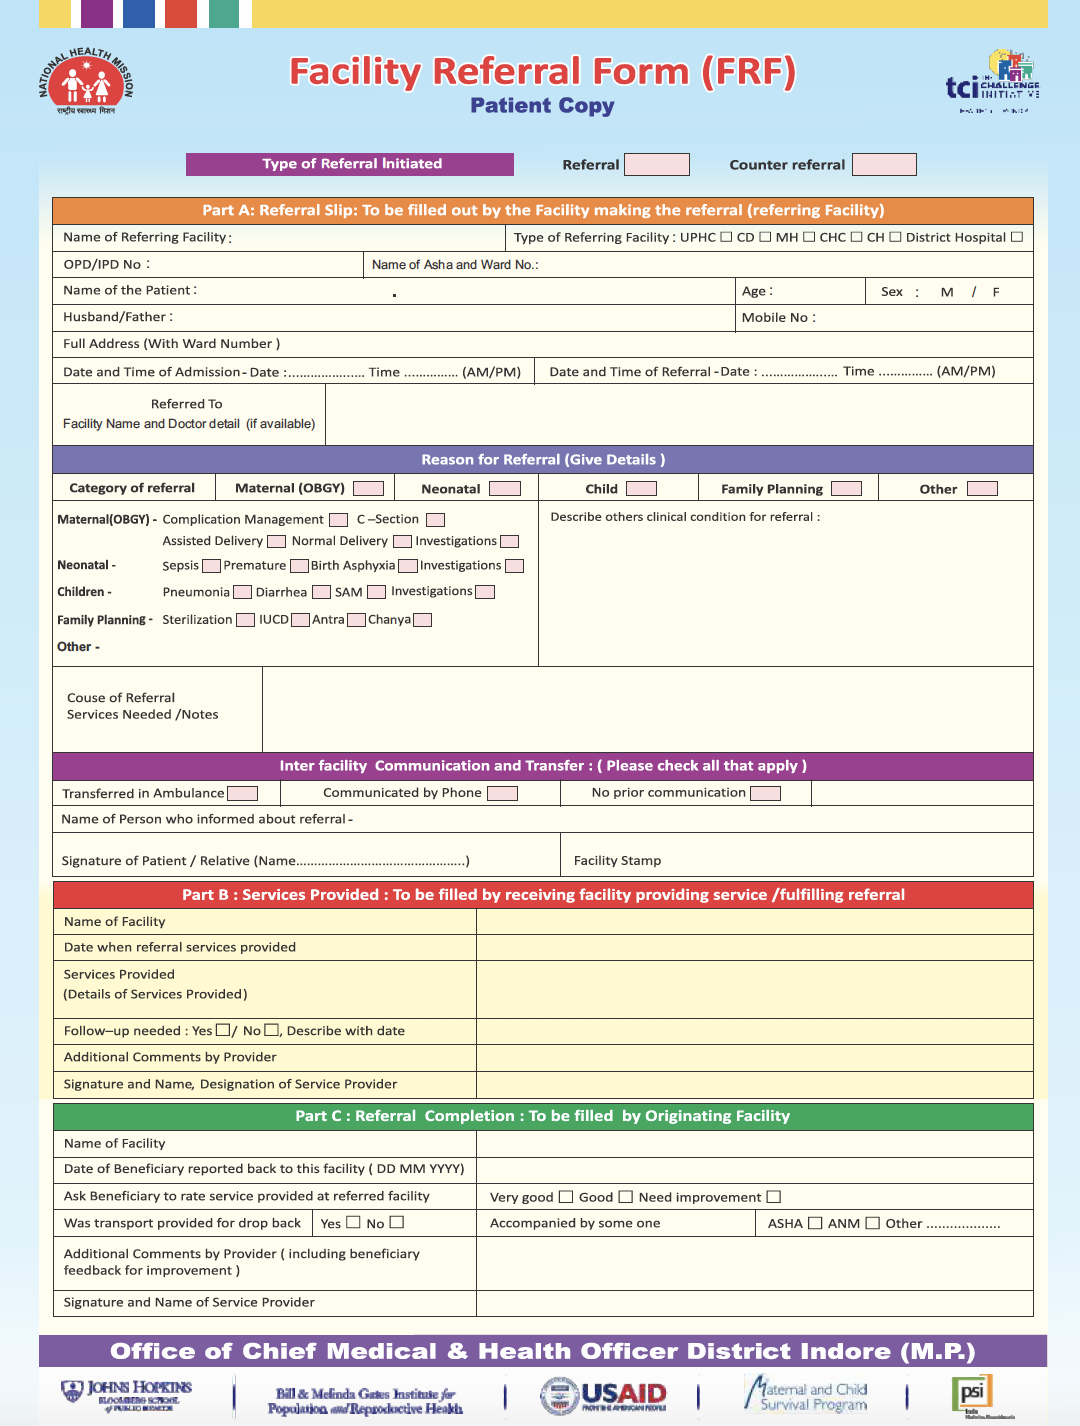 Facility Referral Form, Indore